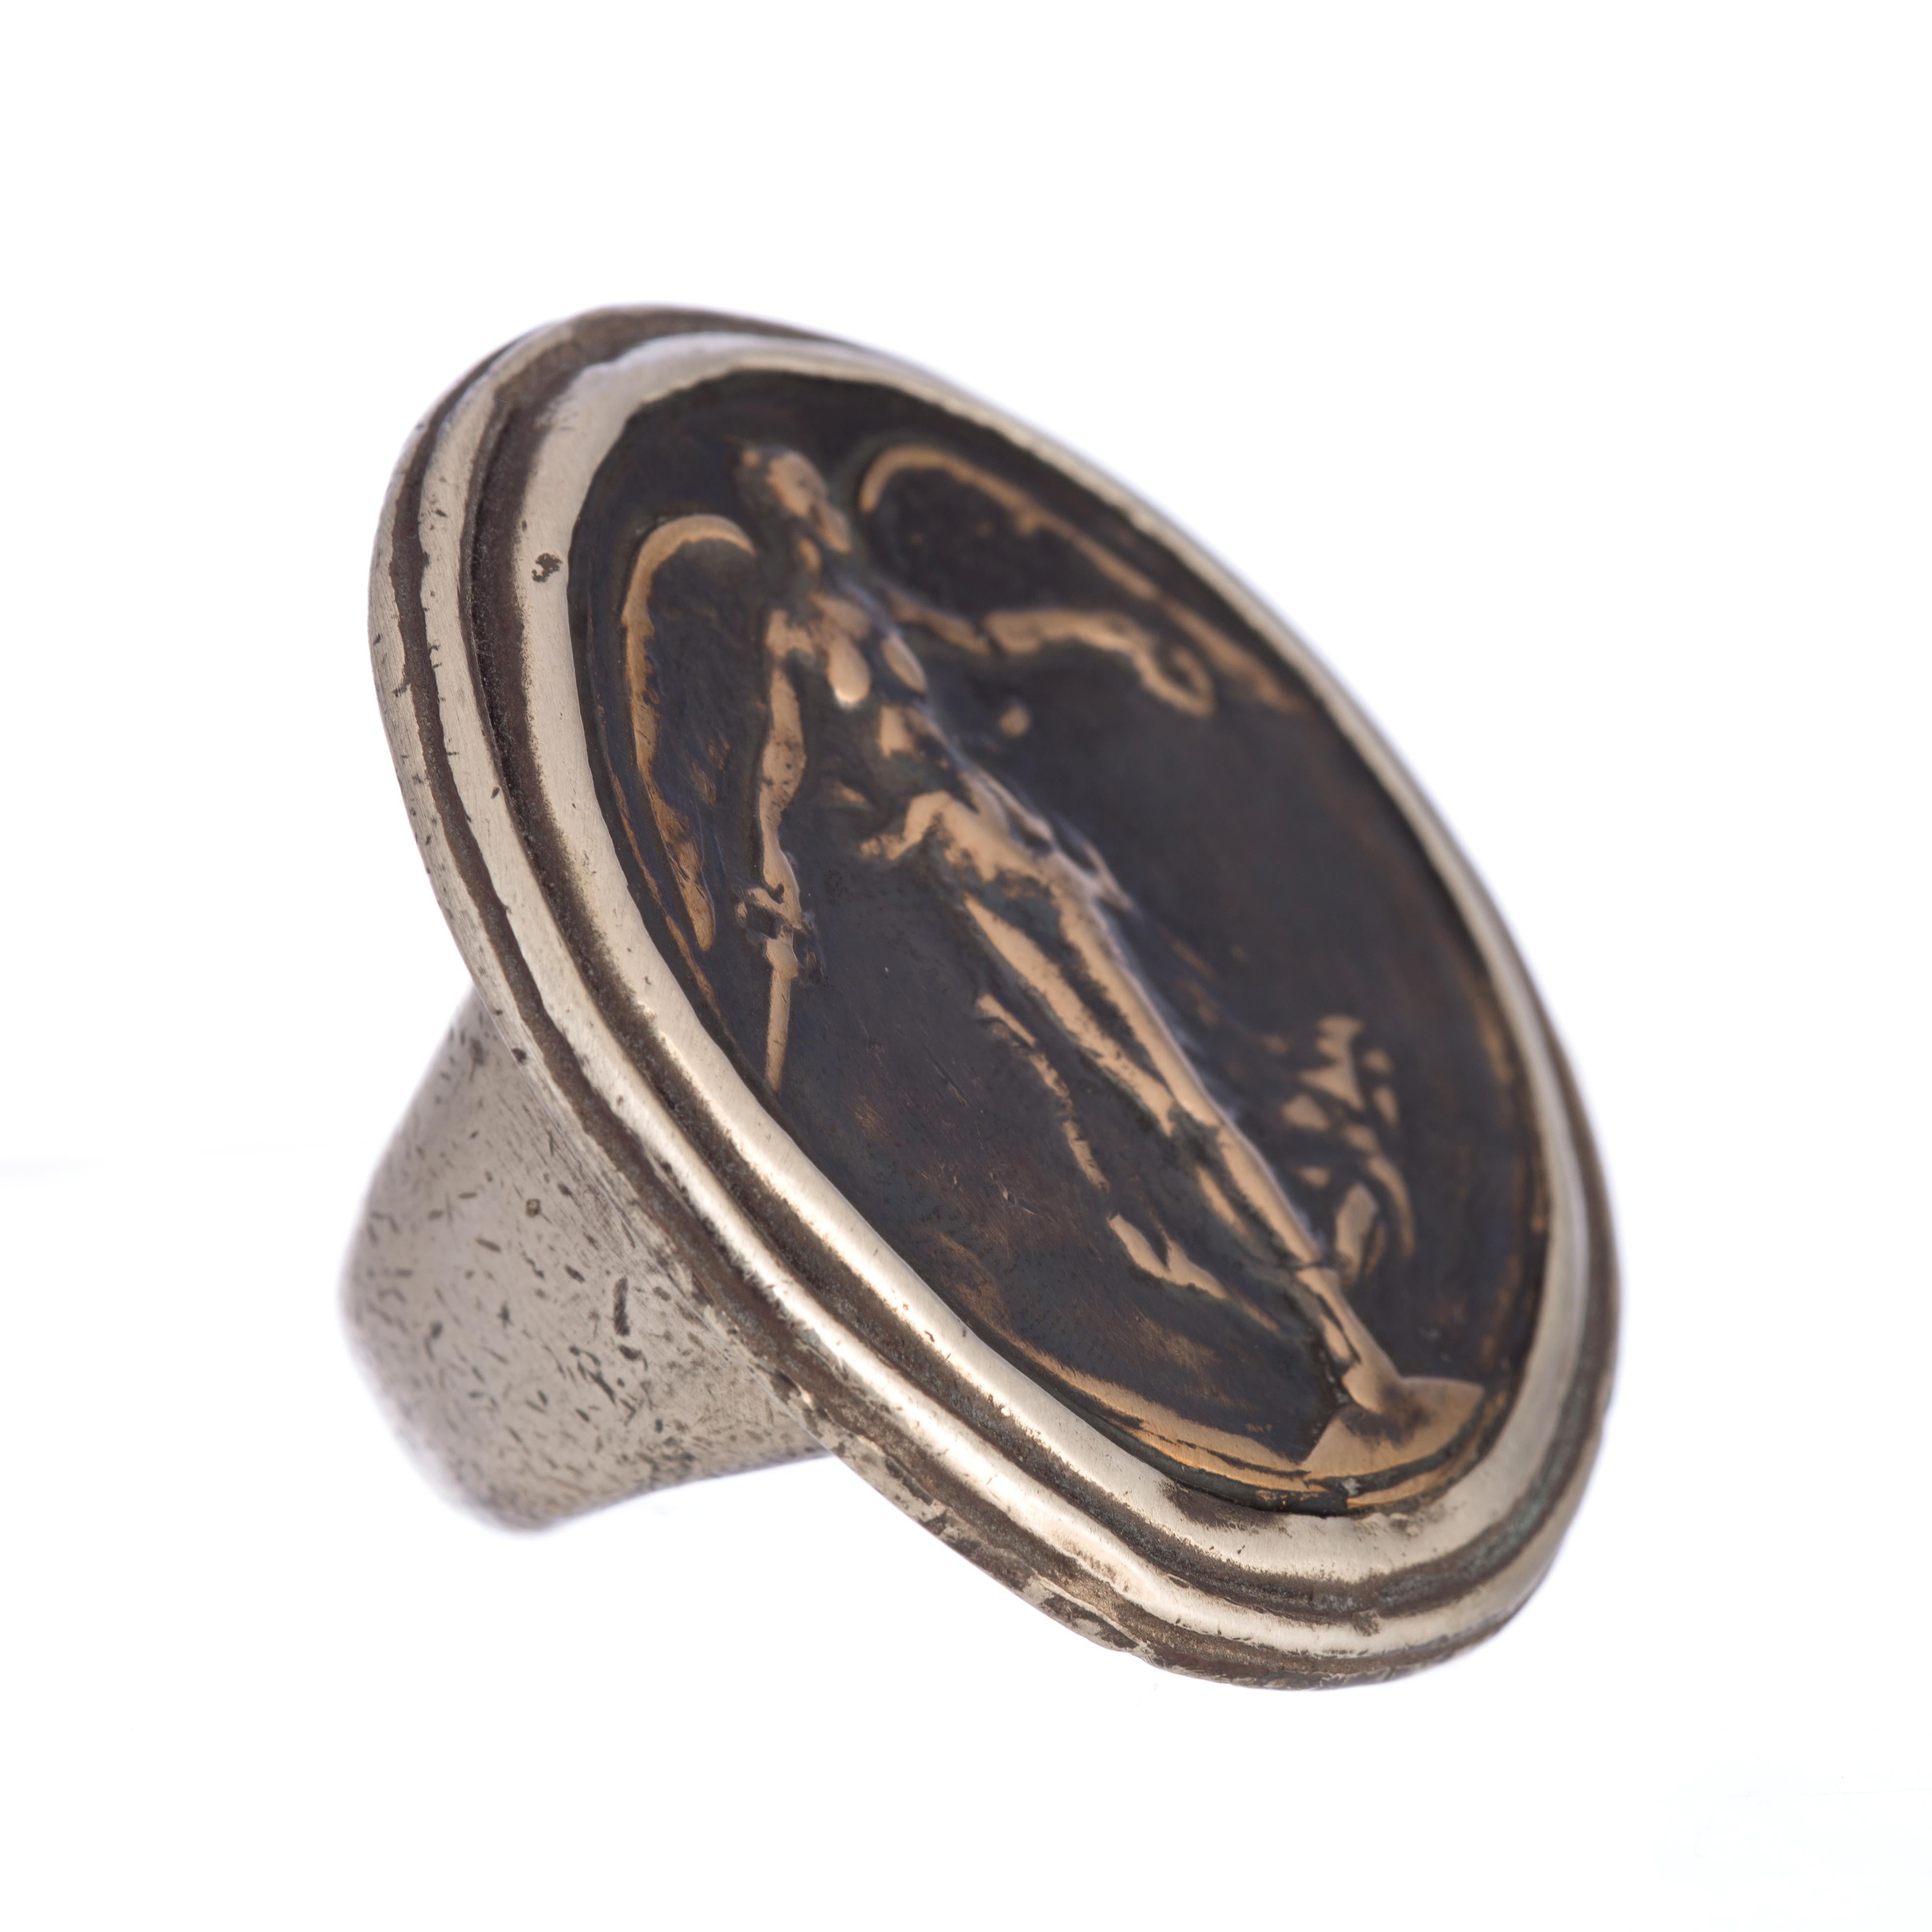 Victory Angel Coin ring by Shannon Koszyk.  Sterling & bronze coin ring, WW1 Victory Angel coin commissioned by Belgium after WW1.  1 3/4